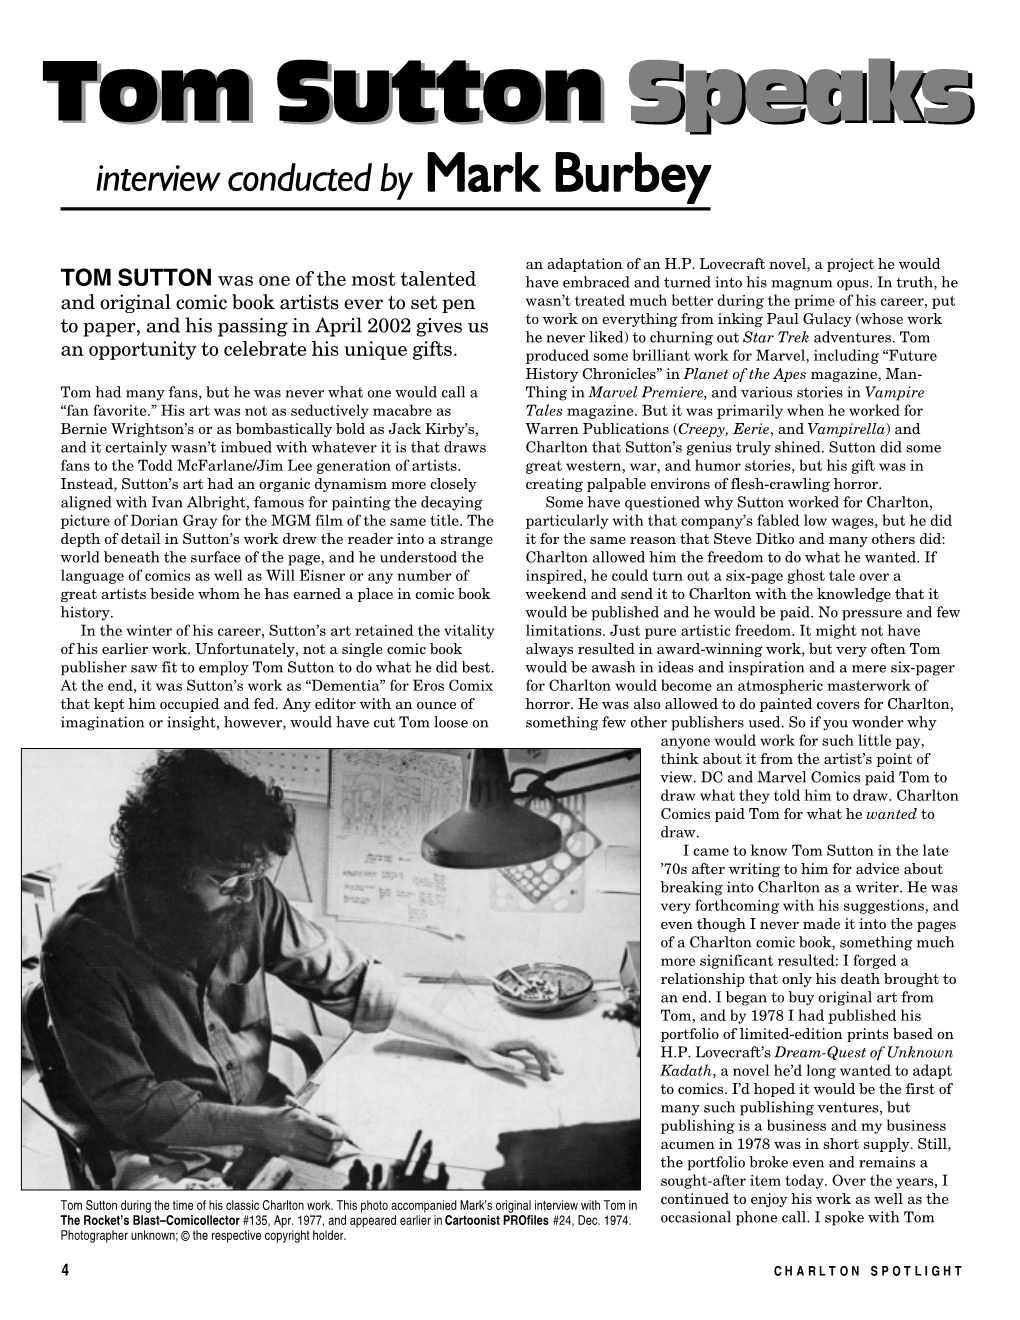 Two Pages of Interview